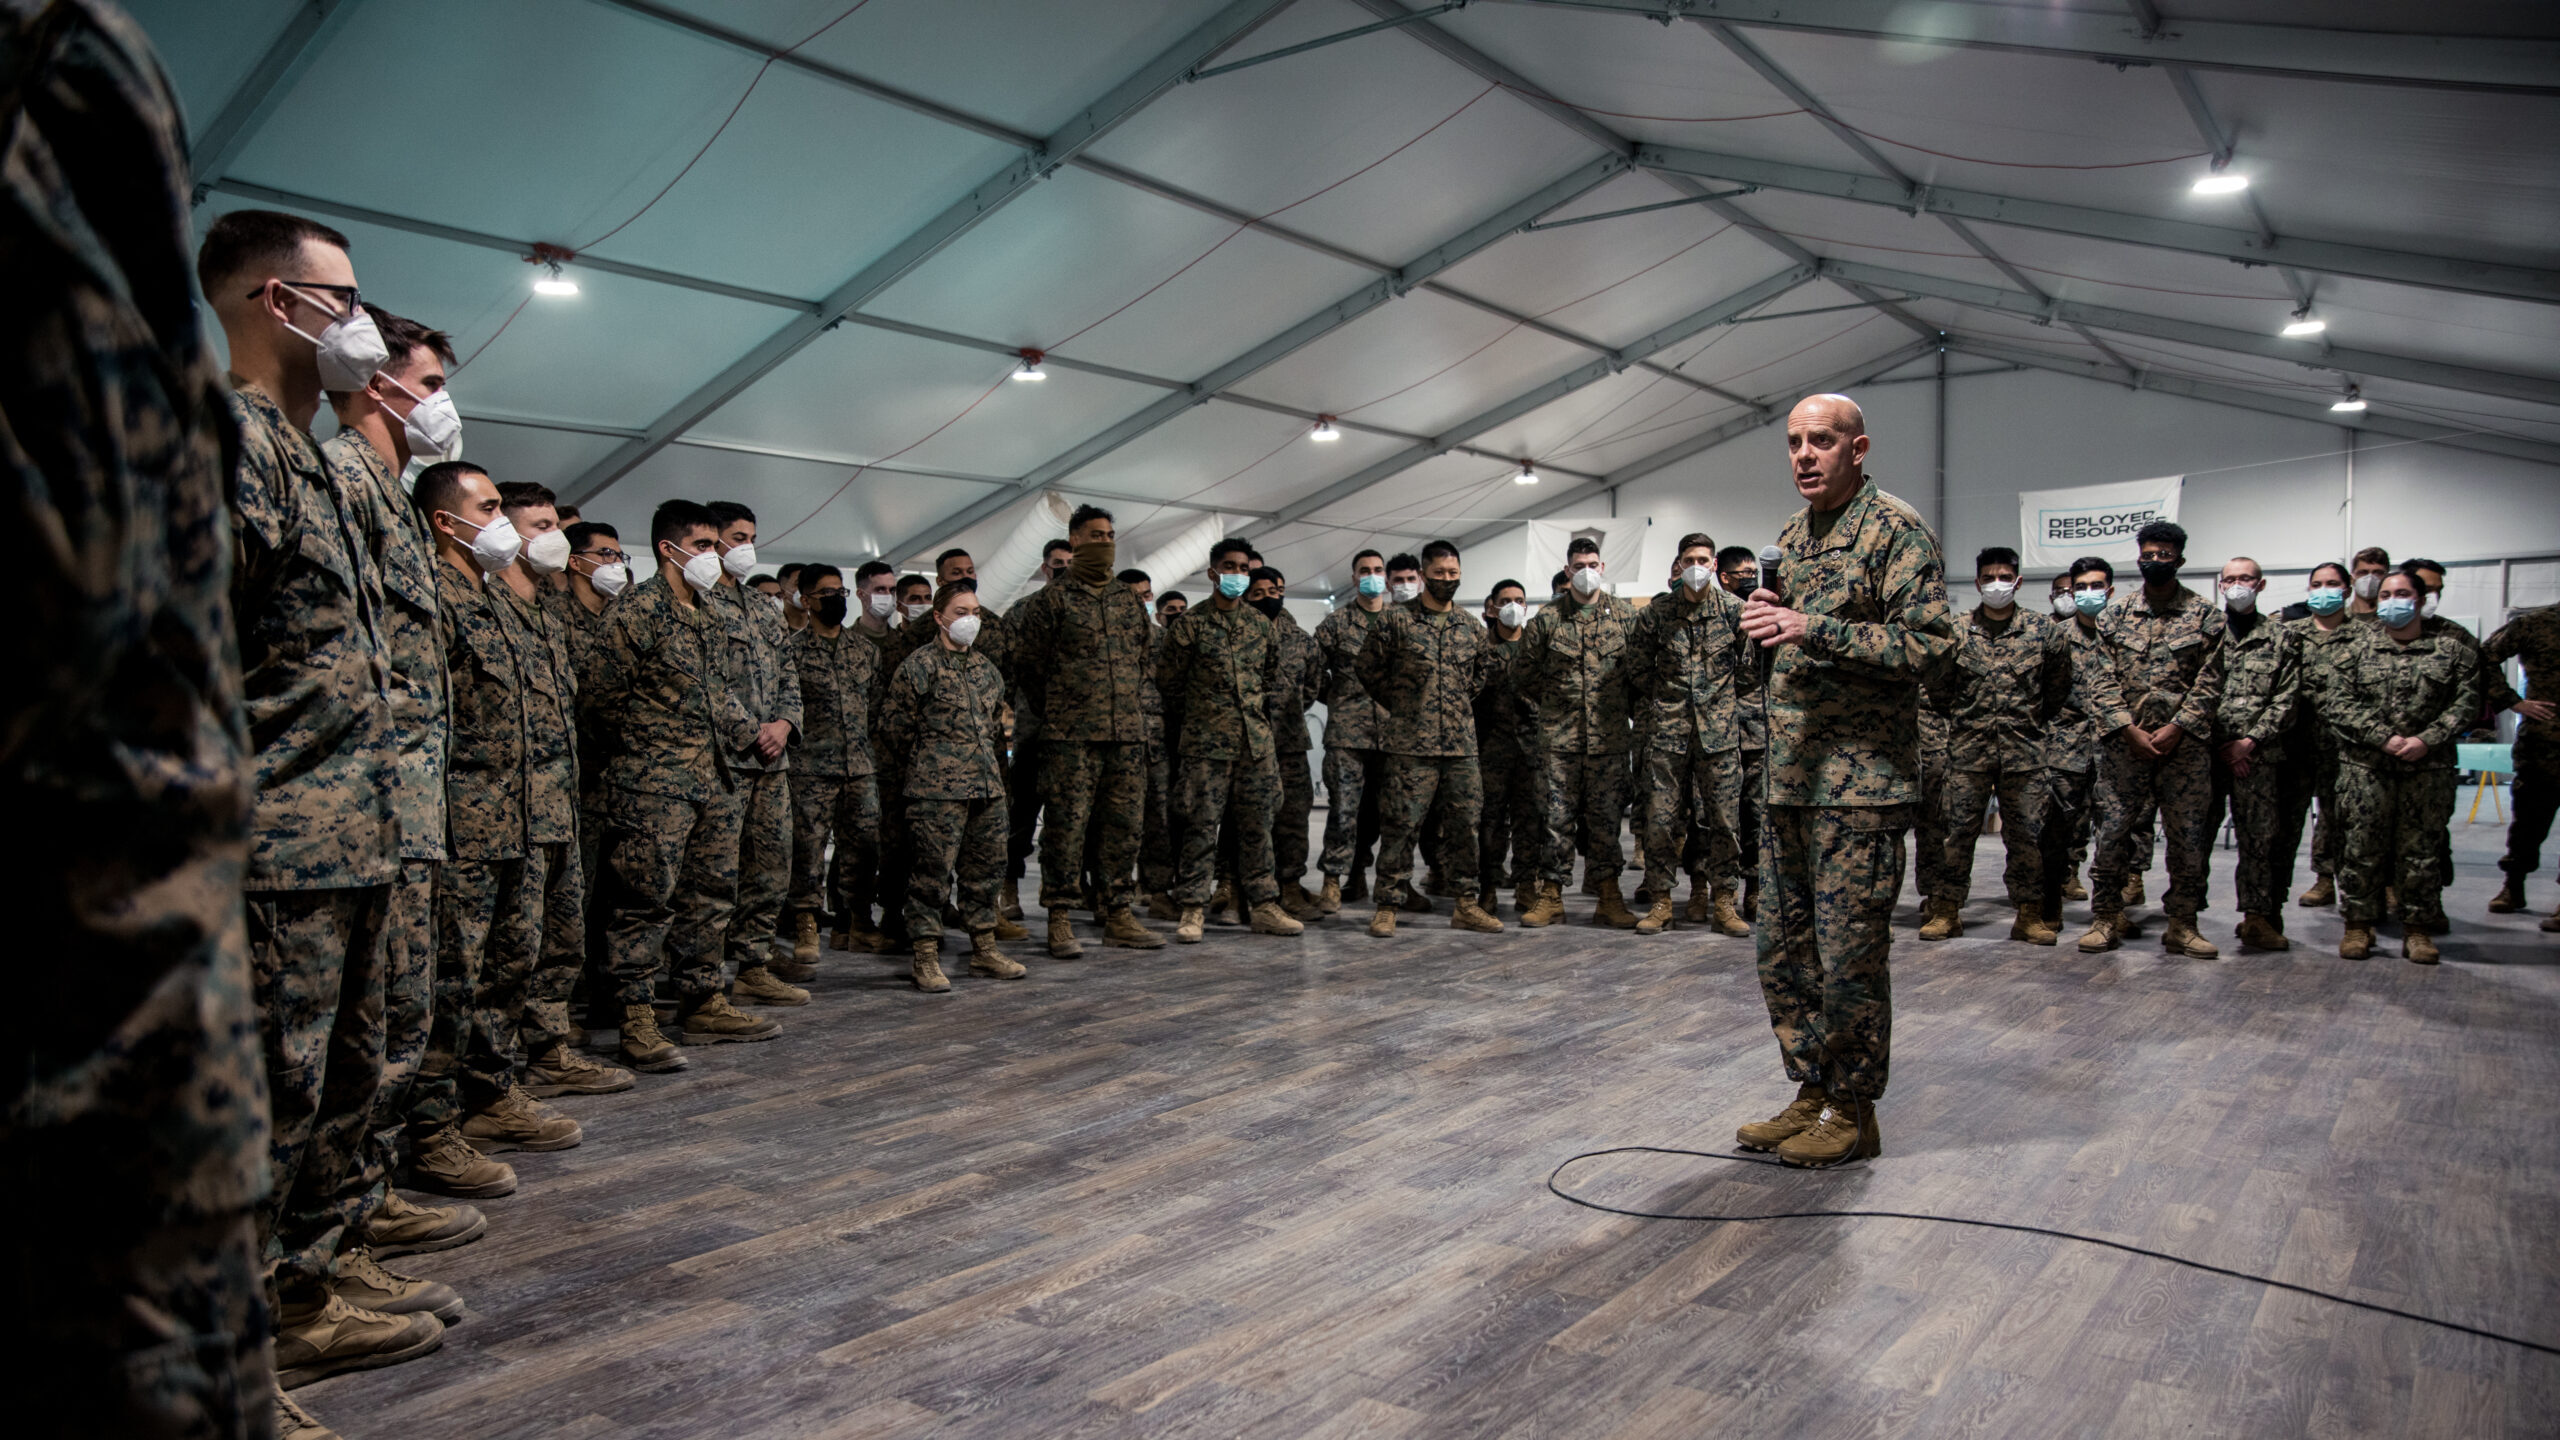 On his way out, Marines’ Berger addresses Force Design critics, Afghanistan and what’s next